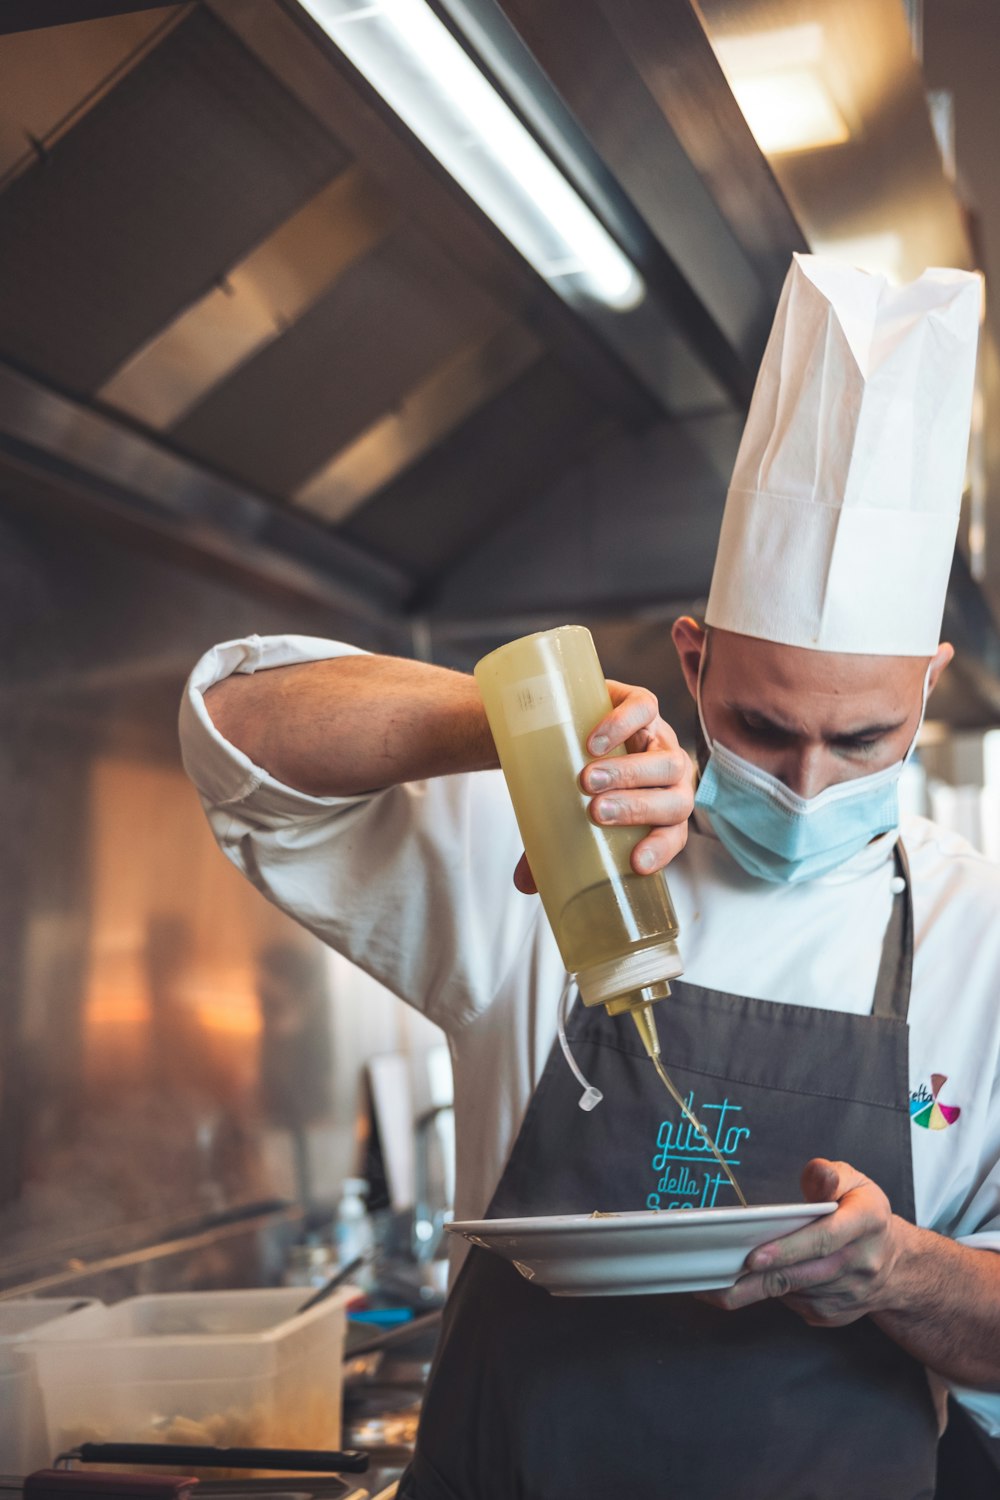 a man in a chef's hat is pouring something into a bowl